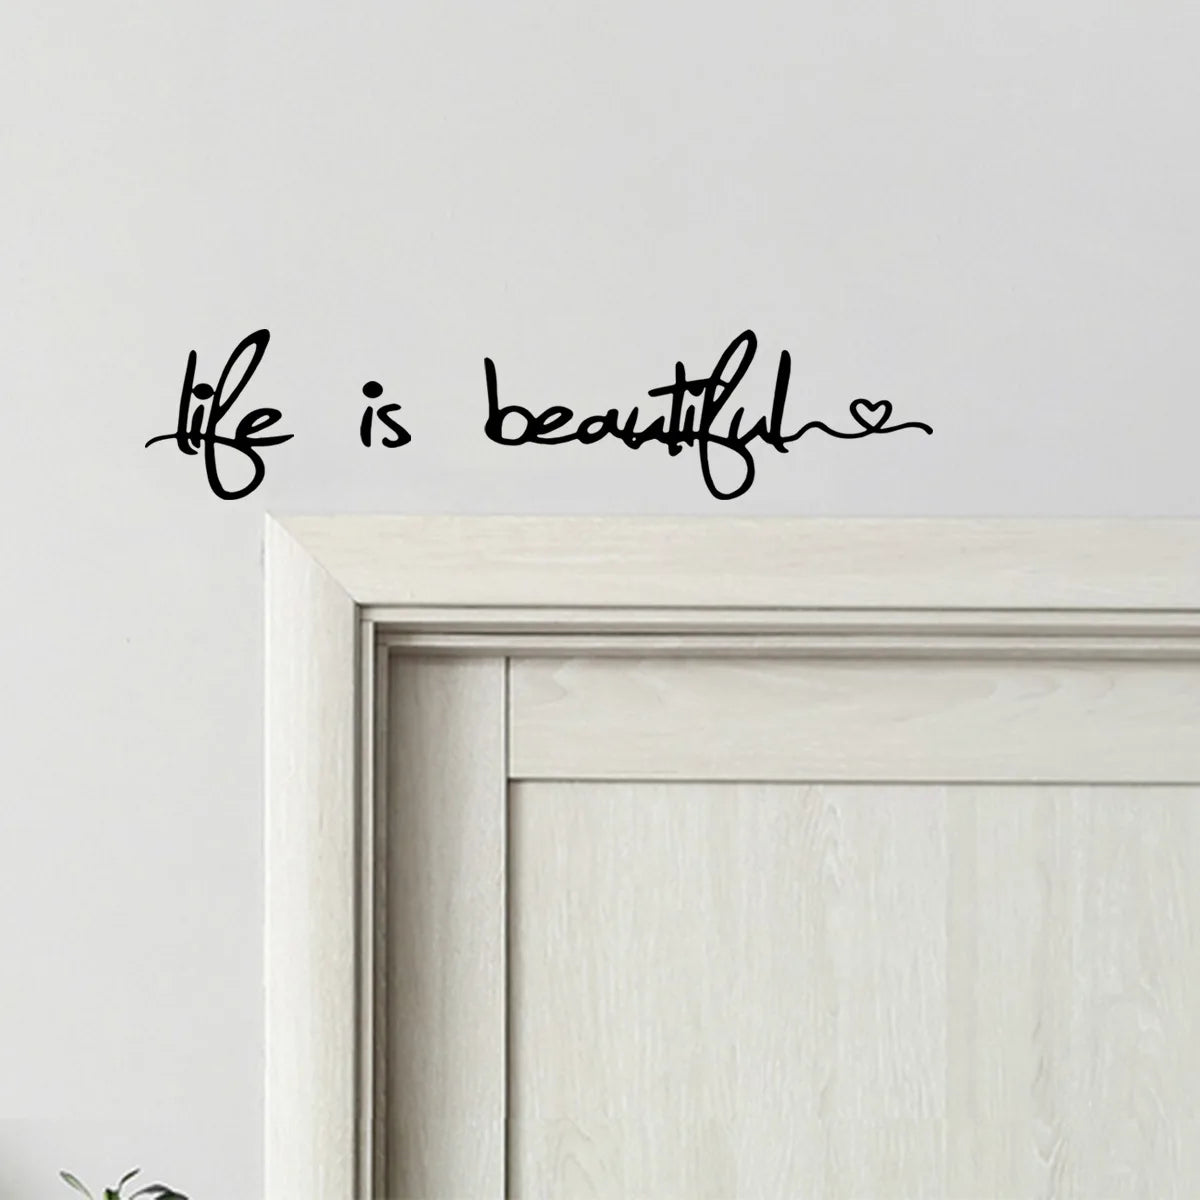 Beautiful Life Inspirational Wall Sticker Removable Peel and Stick Daily Mantra Wall Decal Creative DIY Home Decor For Living Room Bedroom Dining Room